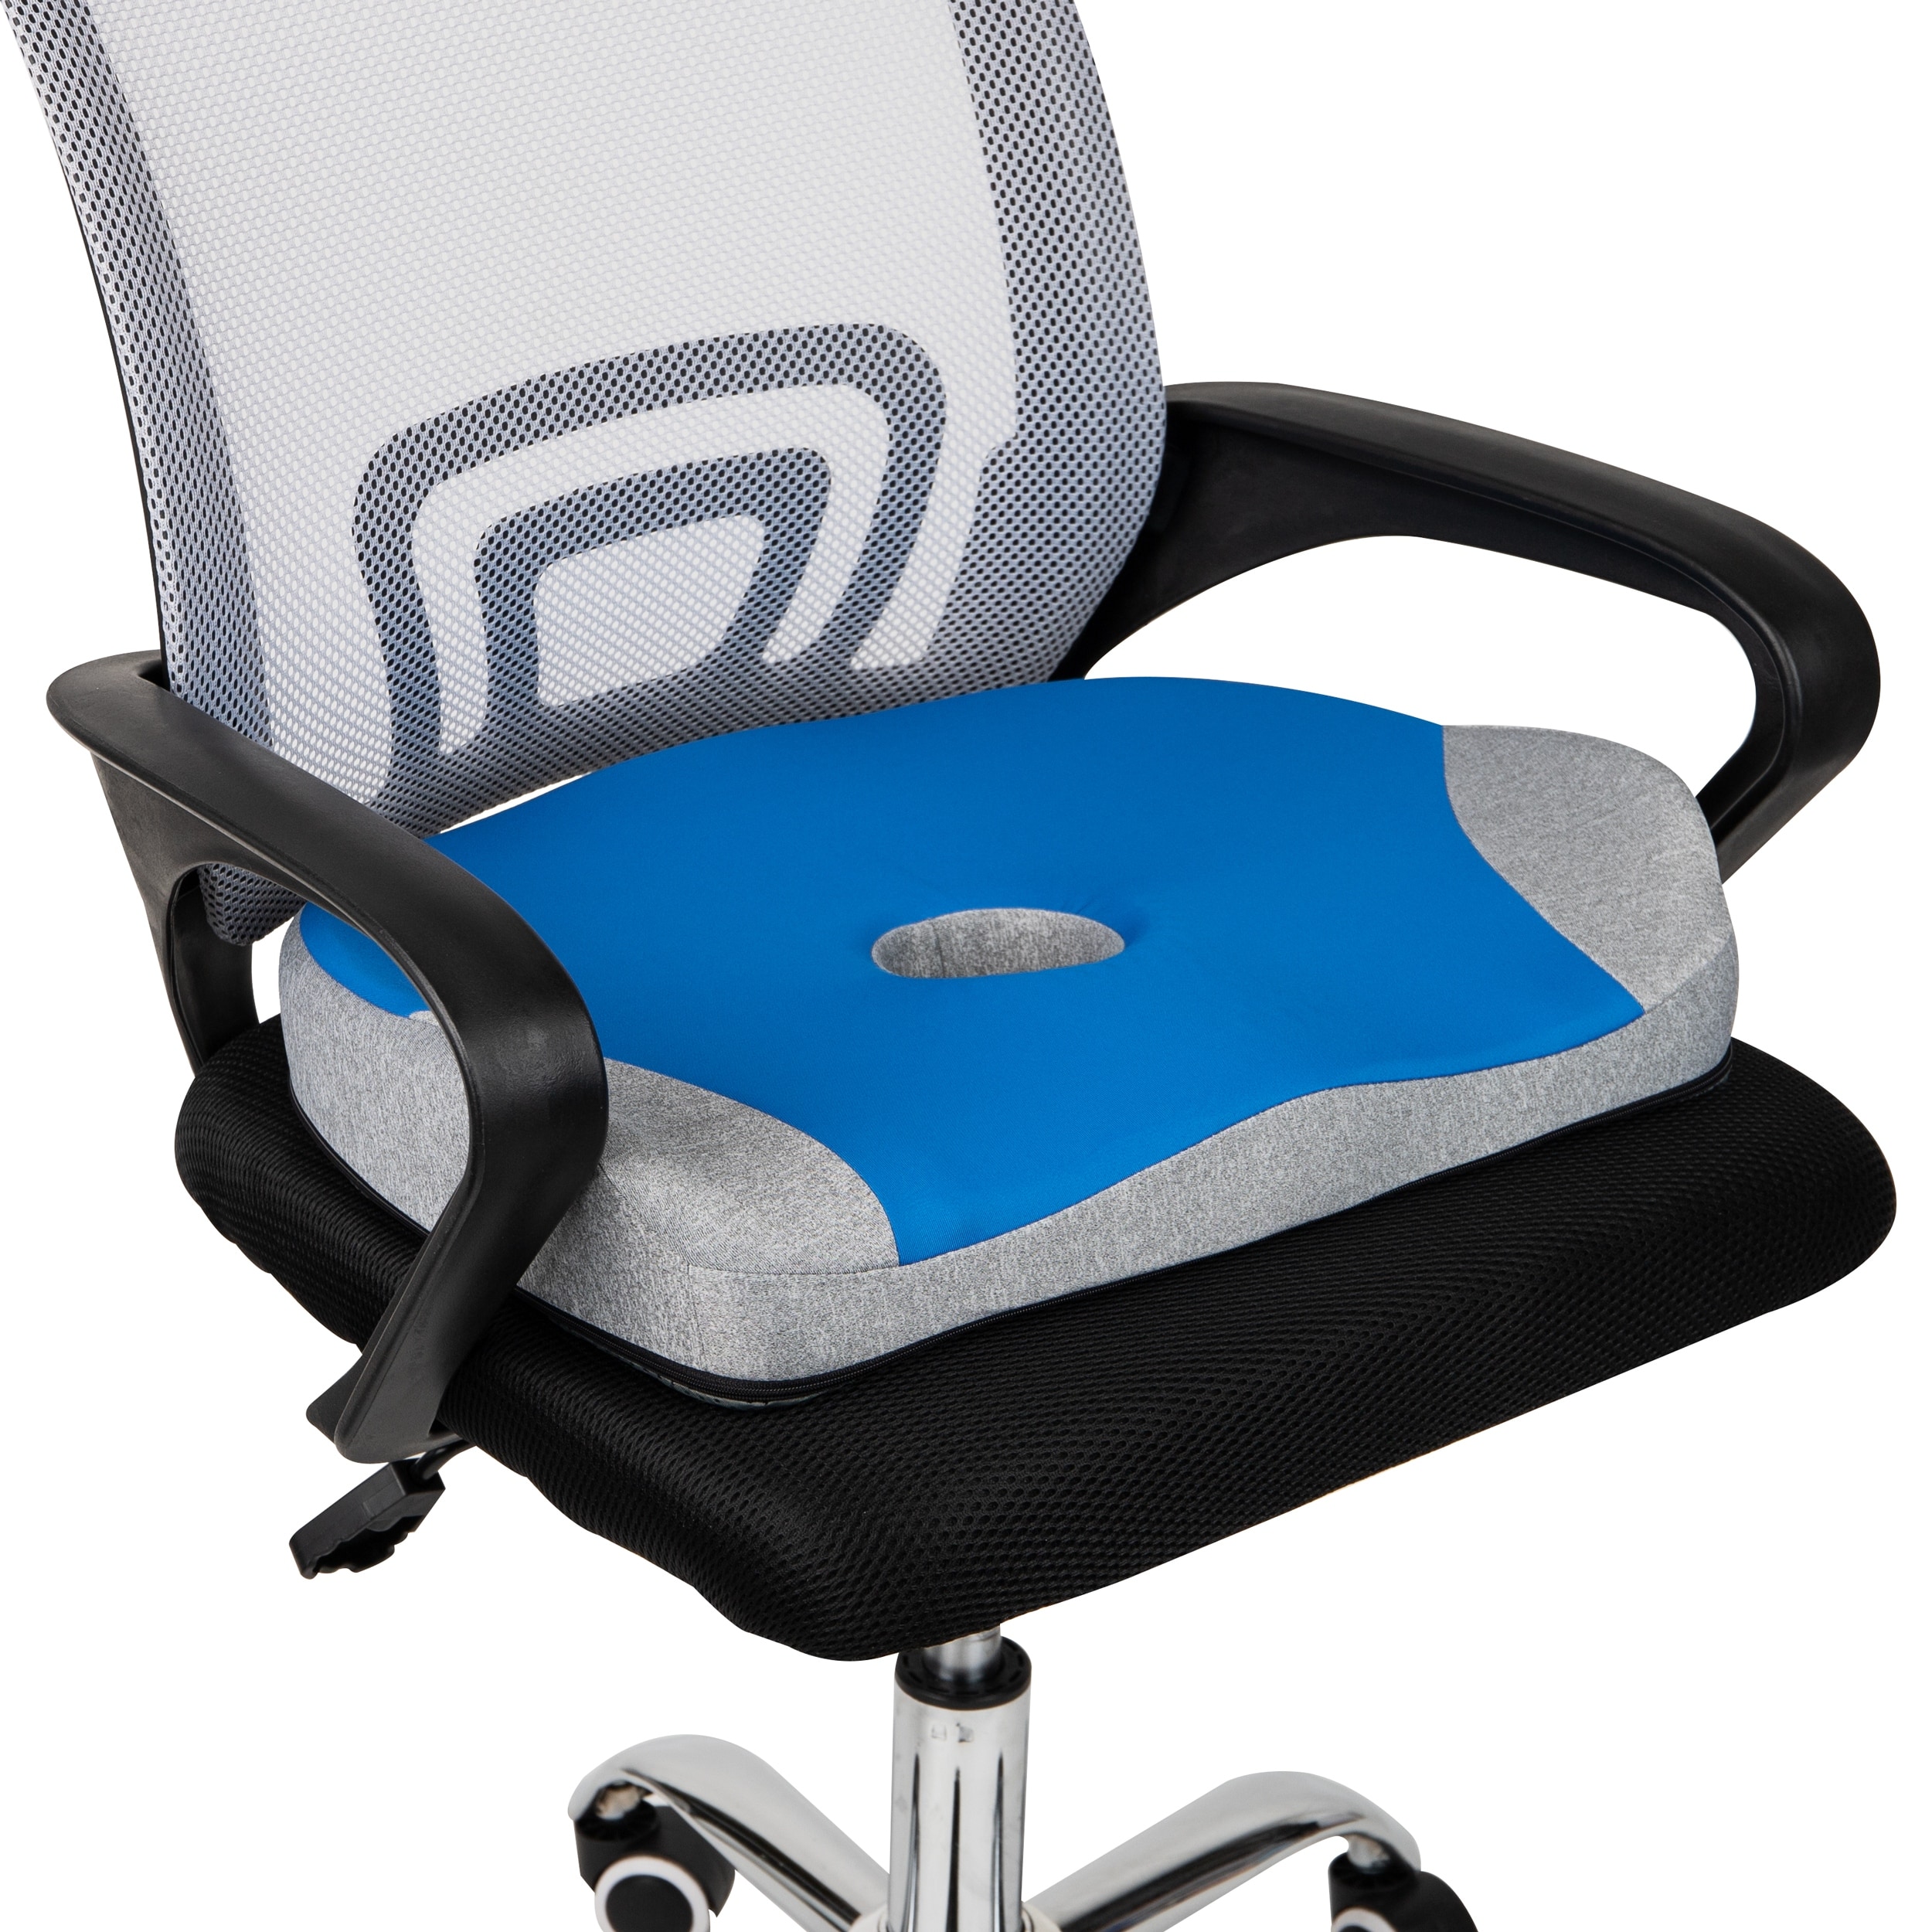 https://ak1.ostkcdn.com/images/products/is/images/direct/fa337f1d2b3ca5a12bd9b170ffcad8588b005a92/Mind-Reader-Harmony-Collection%2C-Ergonomic-Seat-Cushion%2C-Lower-Back-Pressure-Relief%2C-Memory-Foam-with-Gel-Core%2C-Blue.jpg